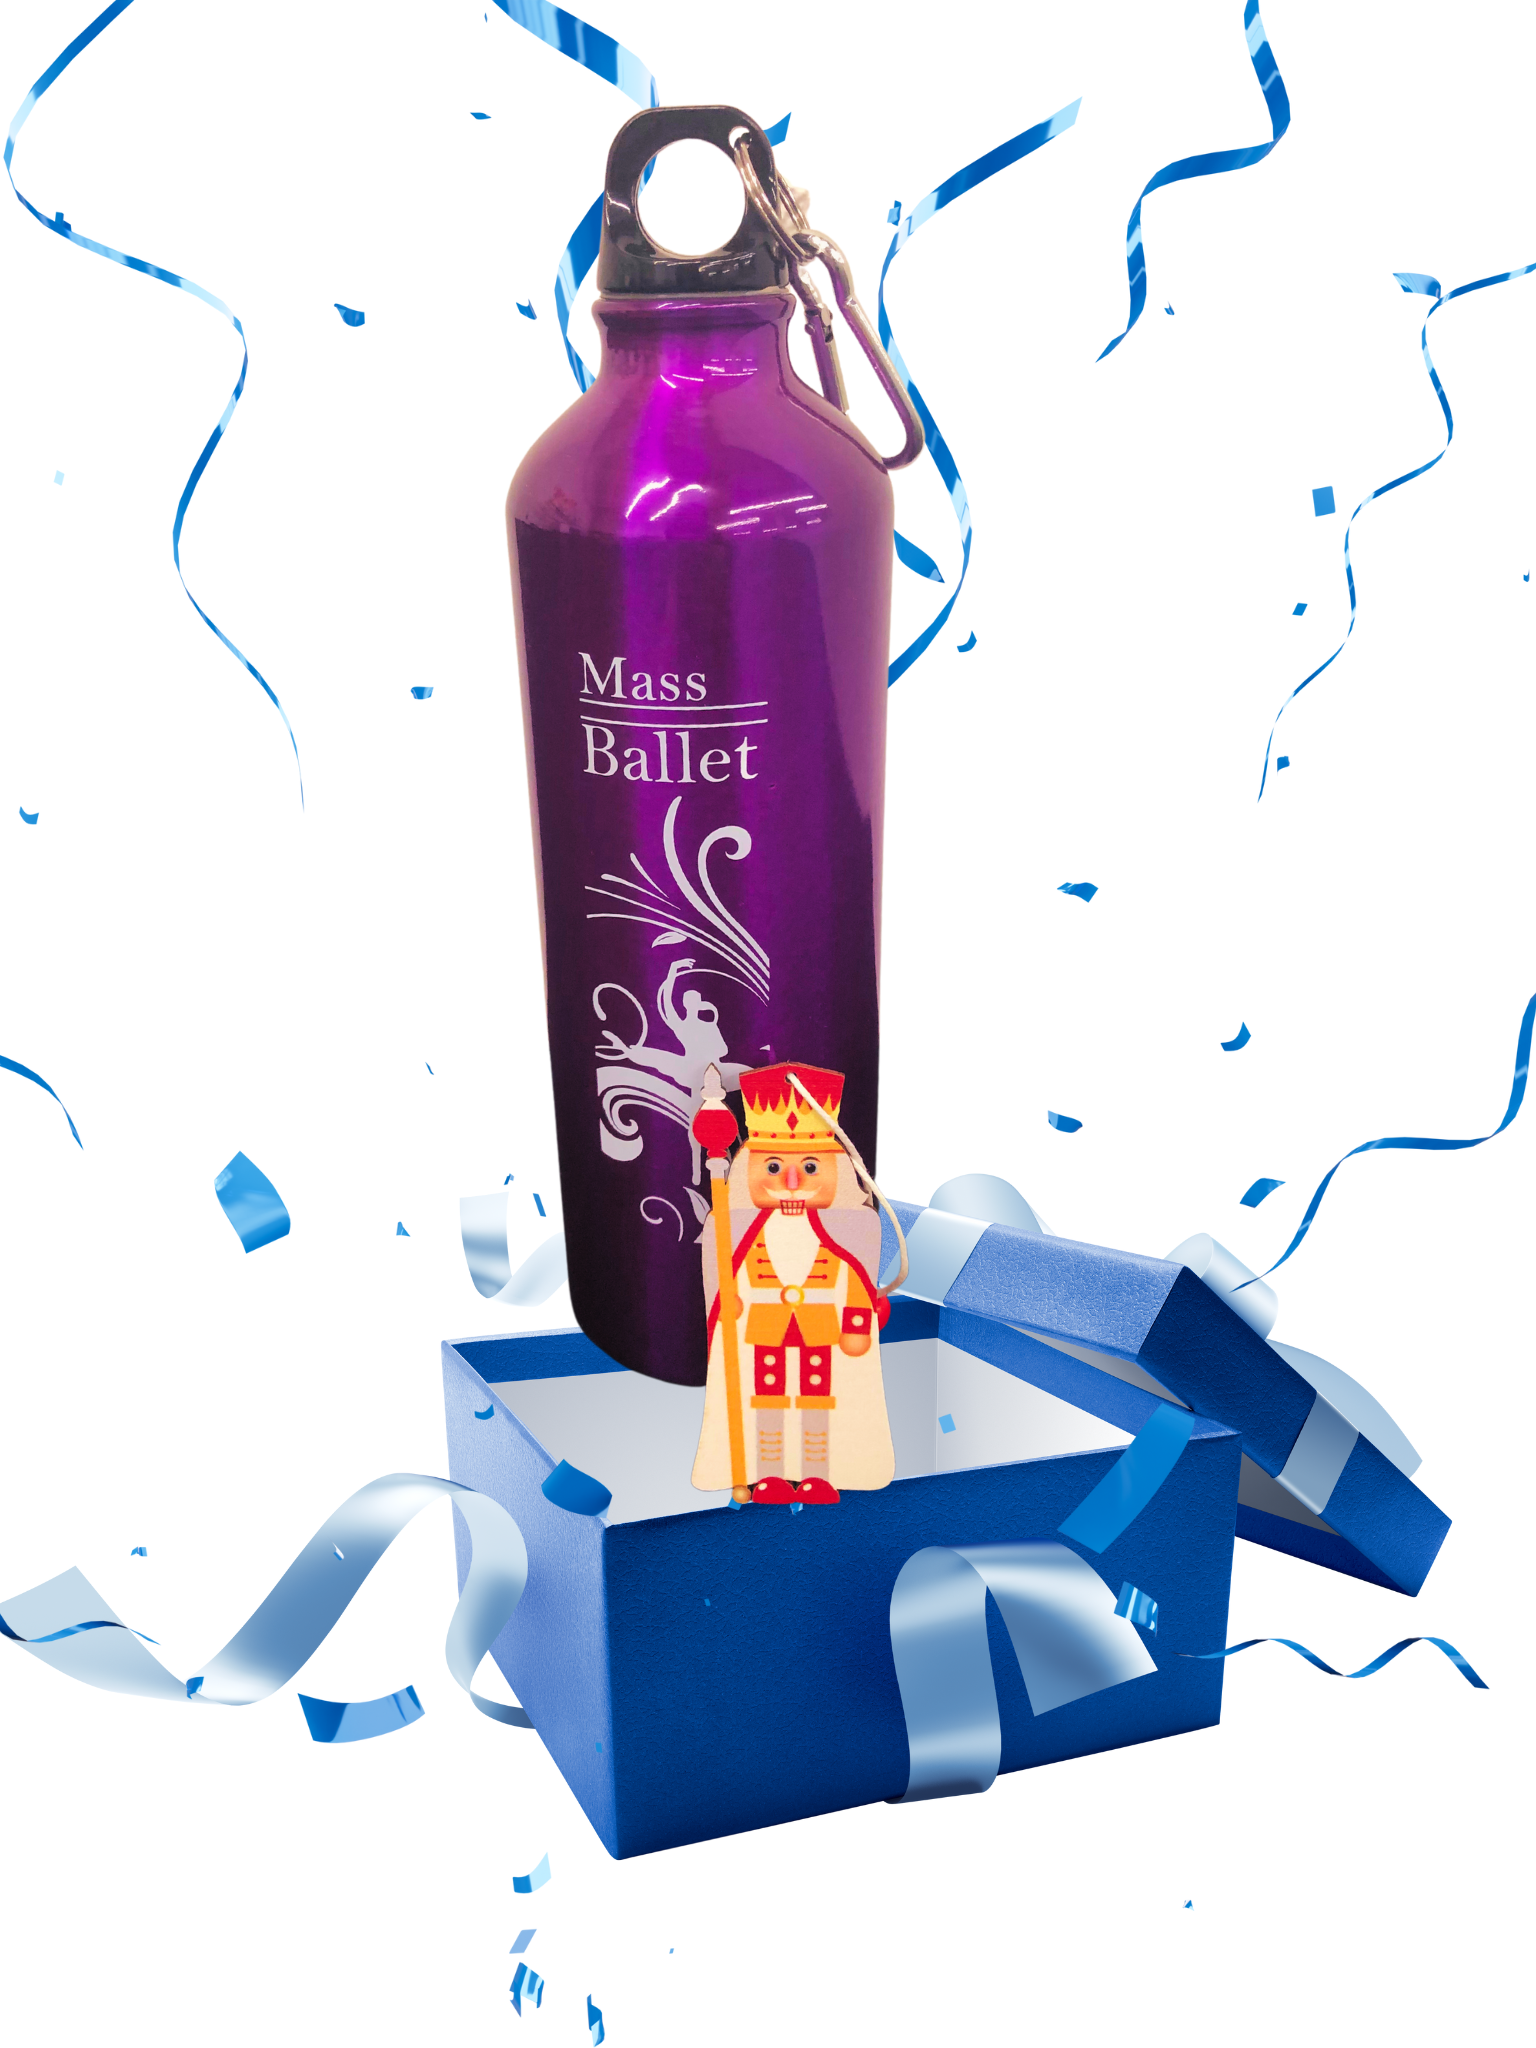 Image of a purple water bottle with Mass Ballet logo and a Nutcracker ornament inside a blue gift box.